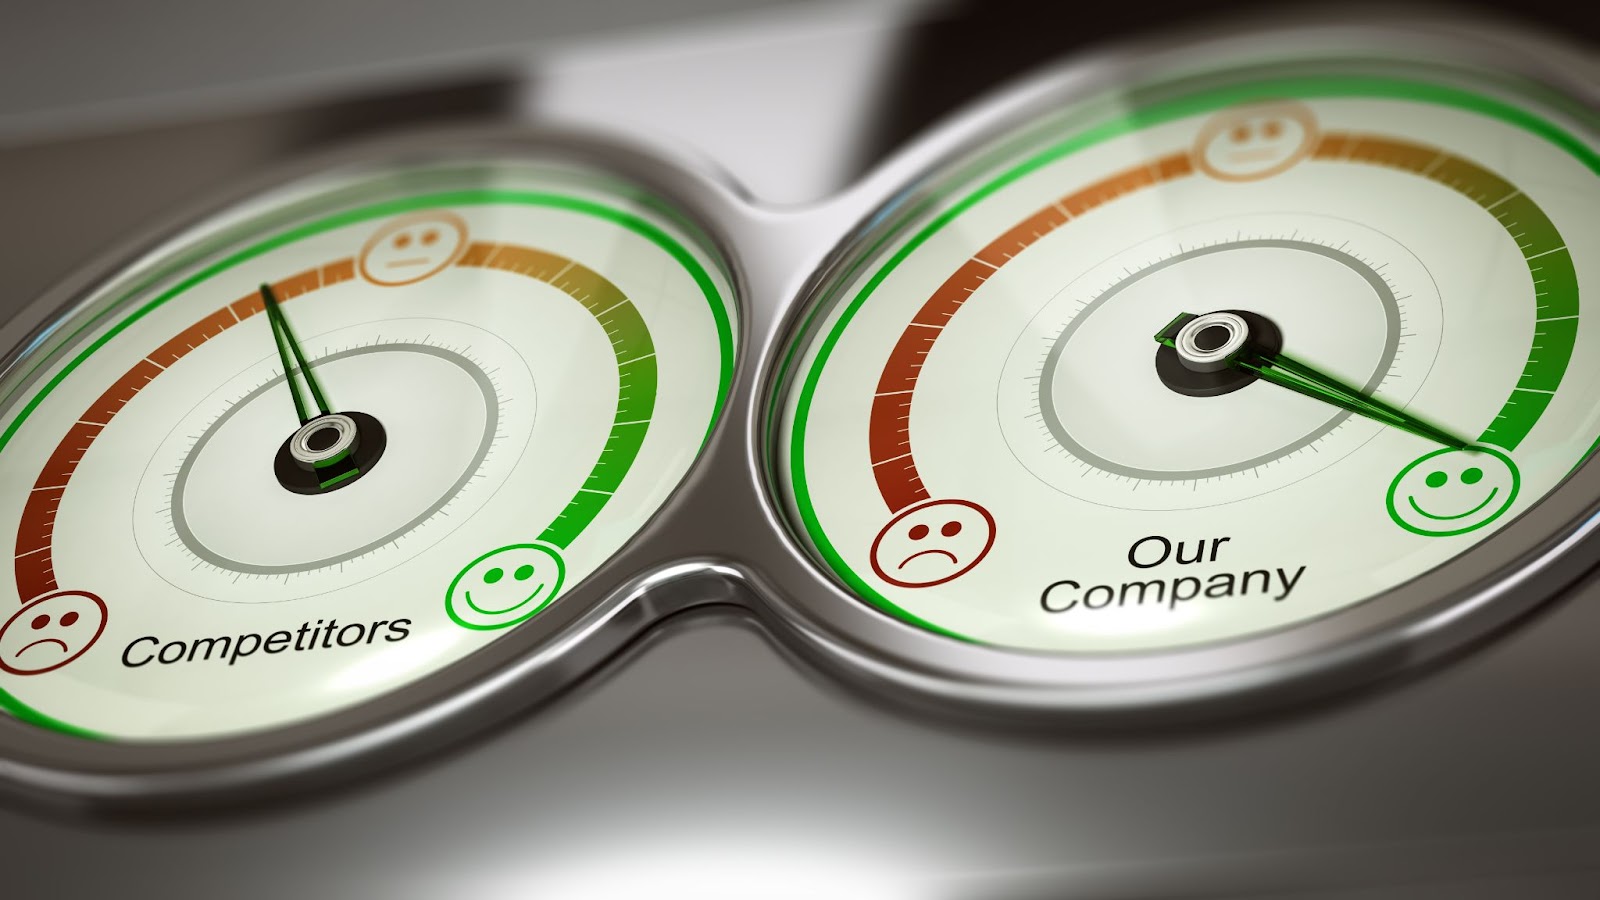 A graphic showing two dials which represent performance measurement for a company and its competitors